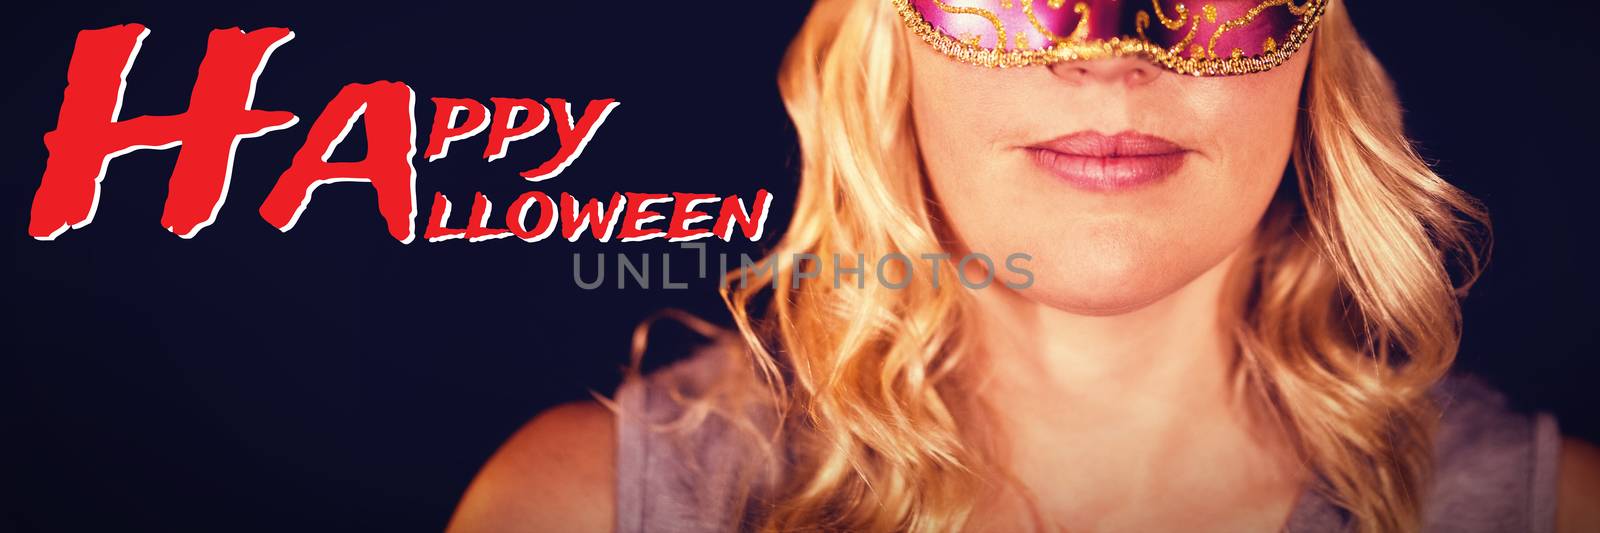 Graphic image of Happy Halloween text against portrait of woman in masquerade mask 